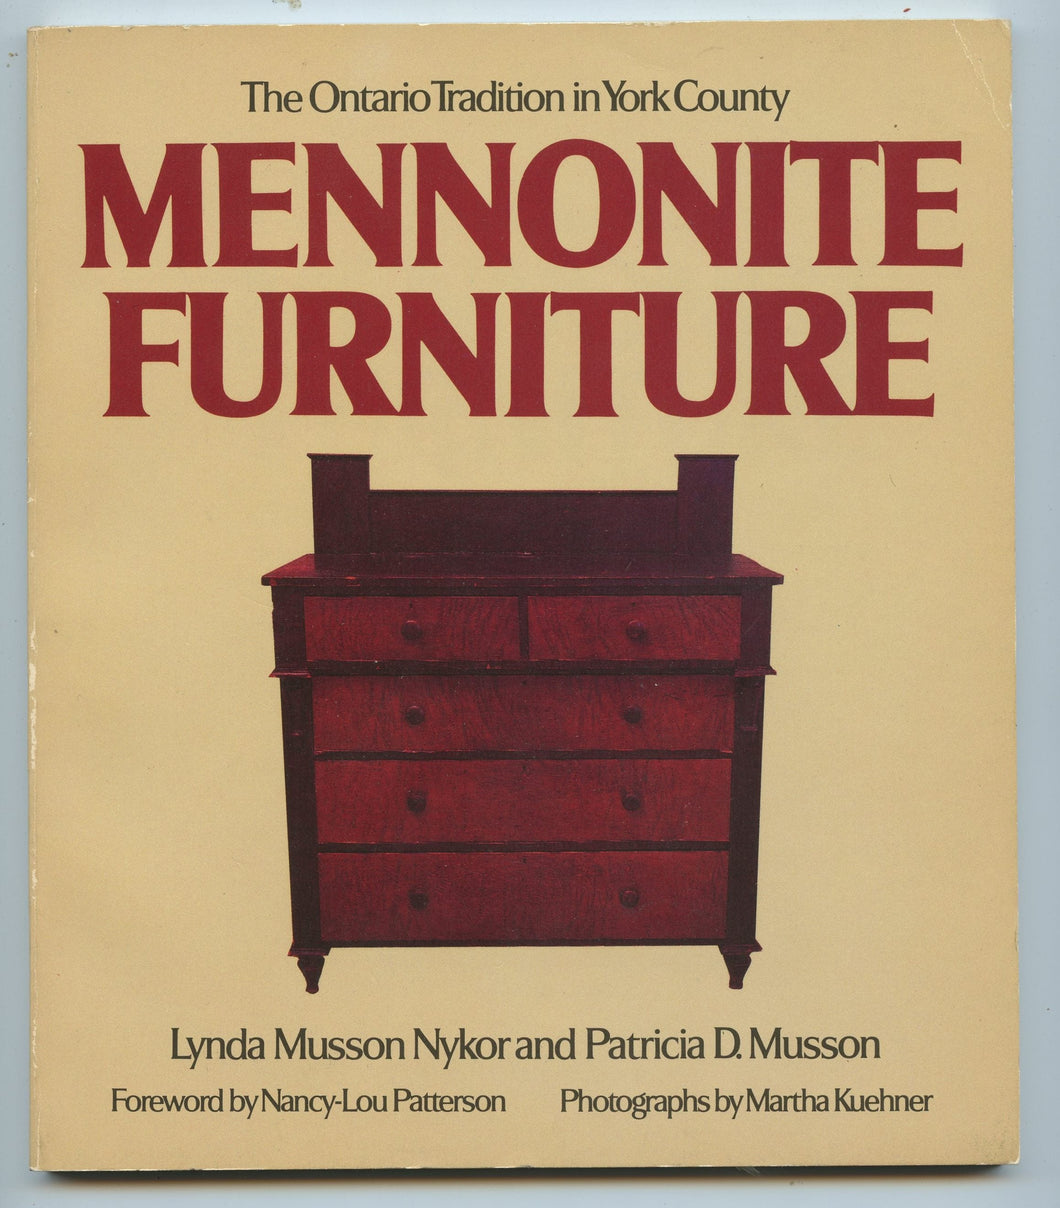 Mennonite Furniture: The Ontario Tradition in York County